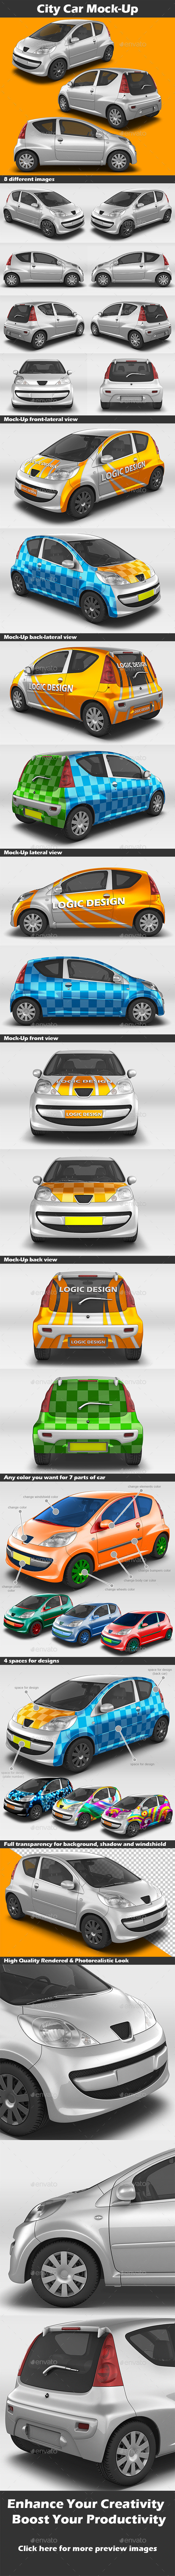 Mock up city car preview